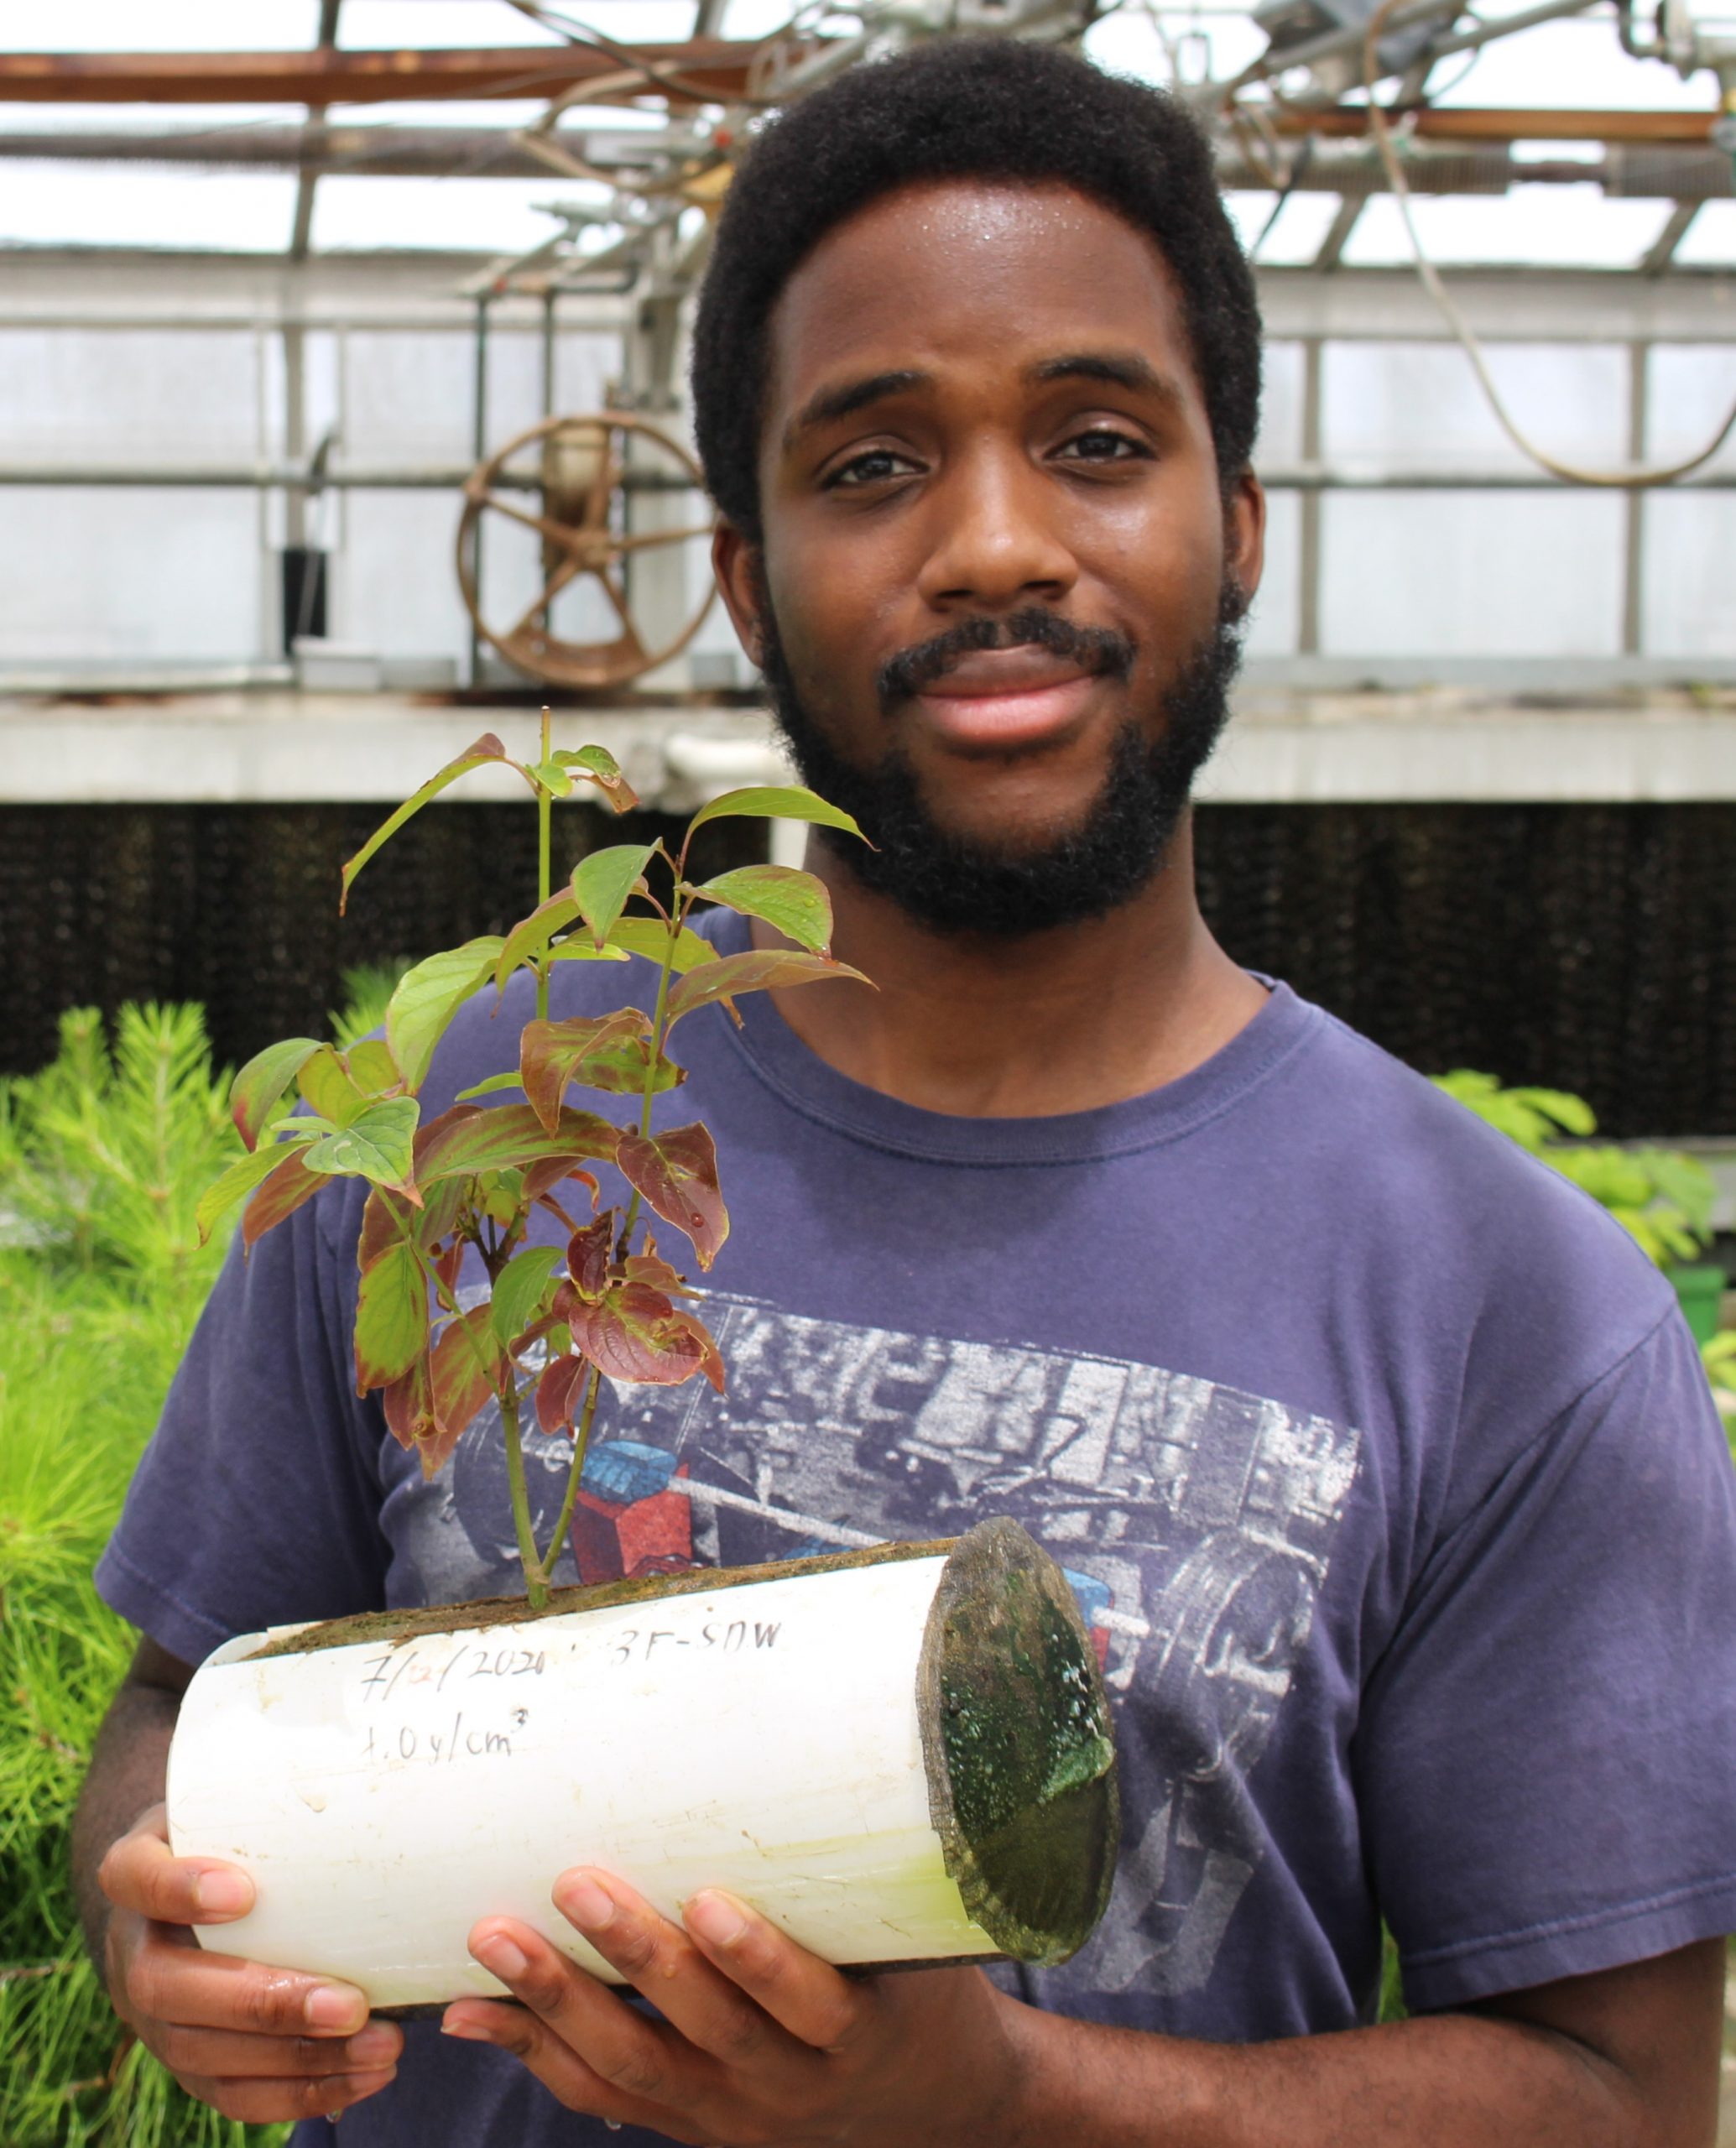 A young African-American man in a purple shirt, holding a white capsule-like item with a plant growing out of it. There is a greenhouse filled with an abundance of plants in the background.